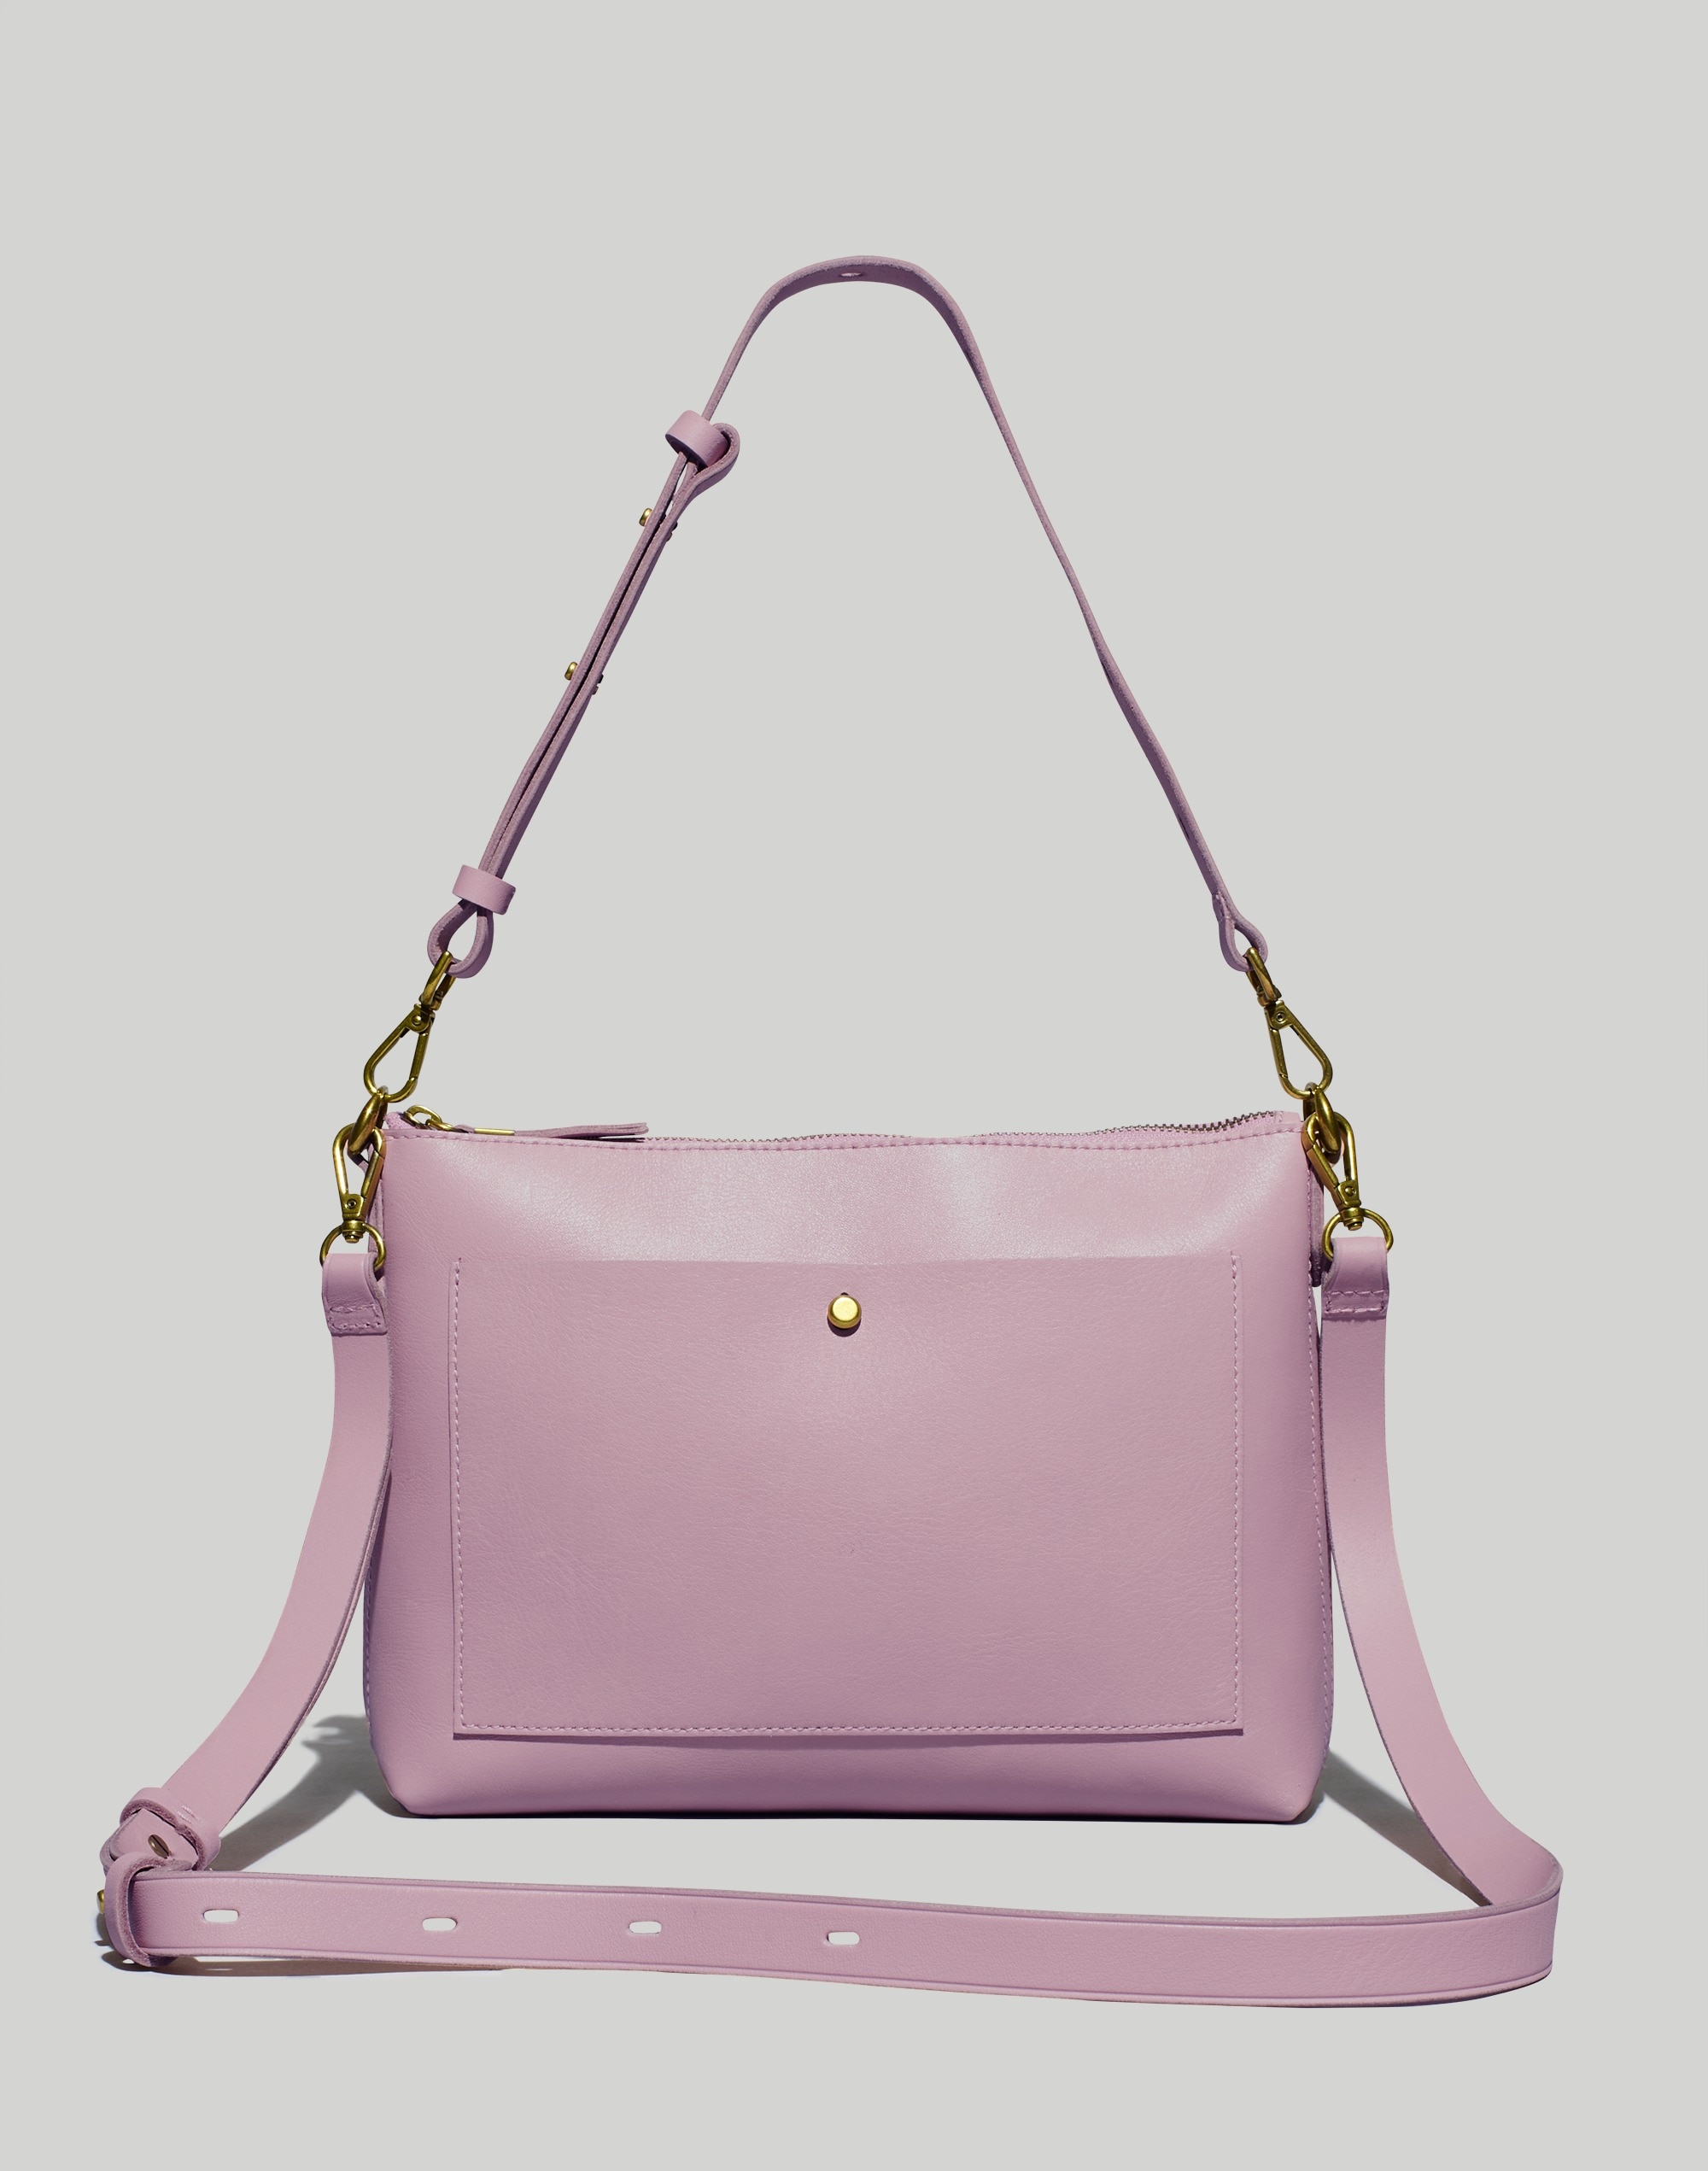 Mw The Transport Shoulder Crossbody Bag In Warm Thistle